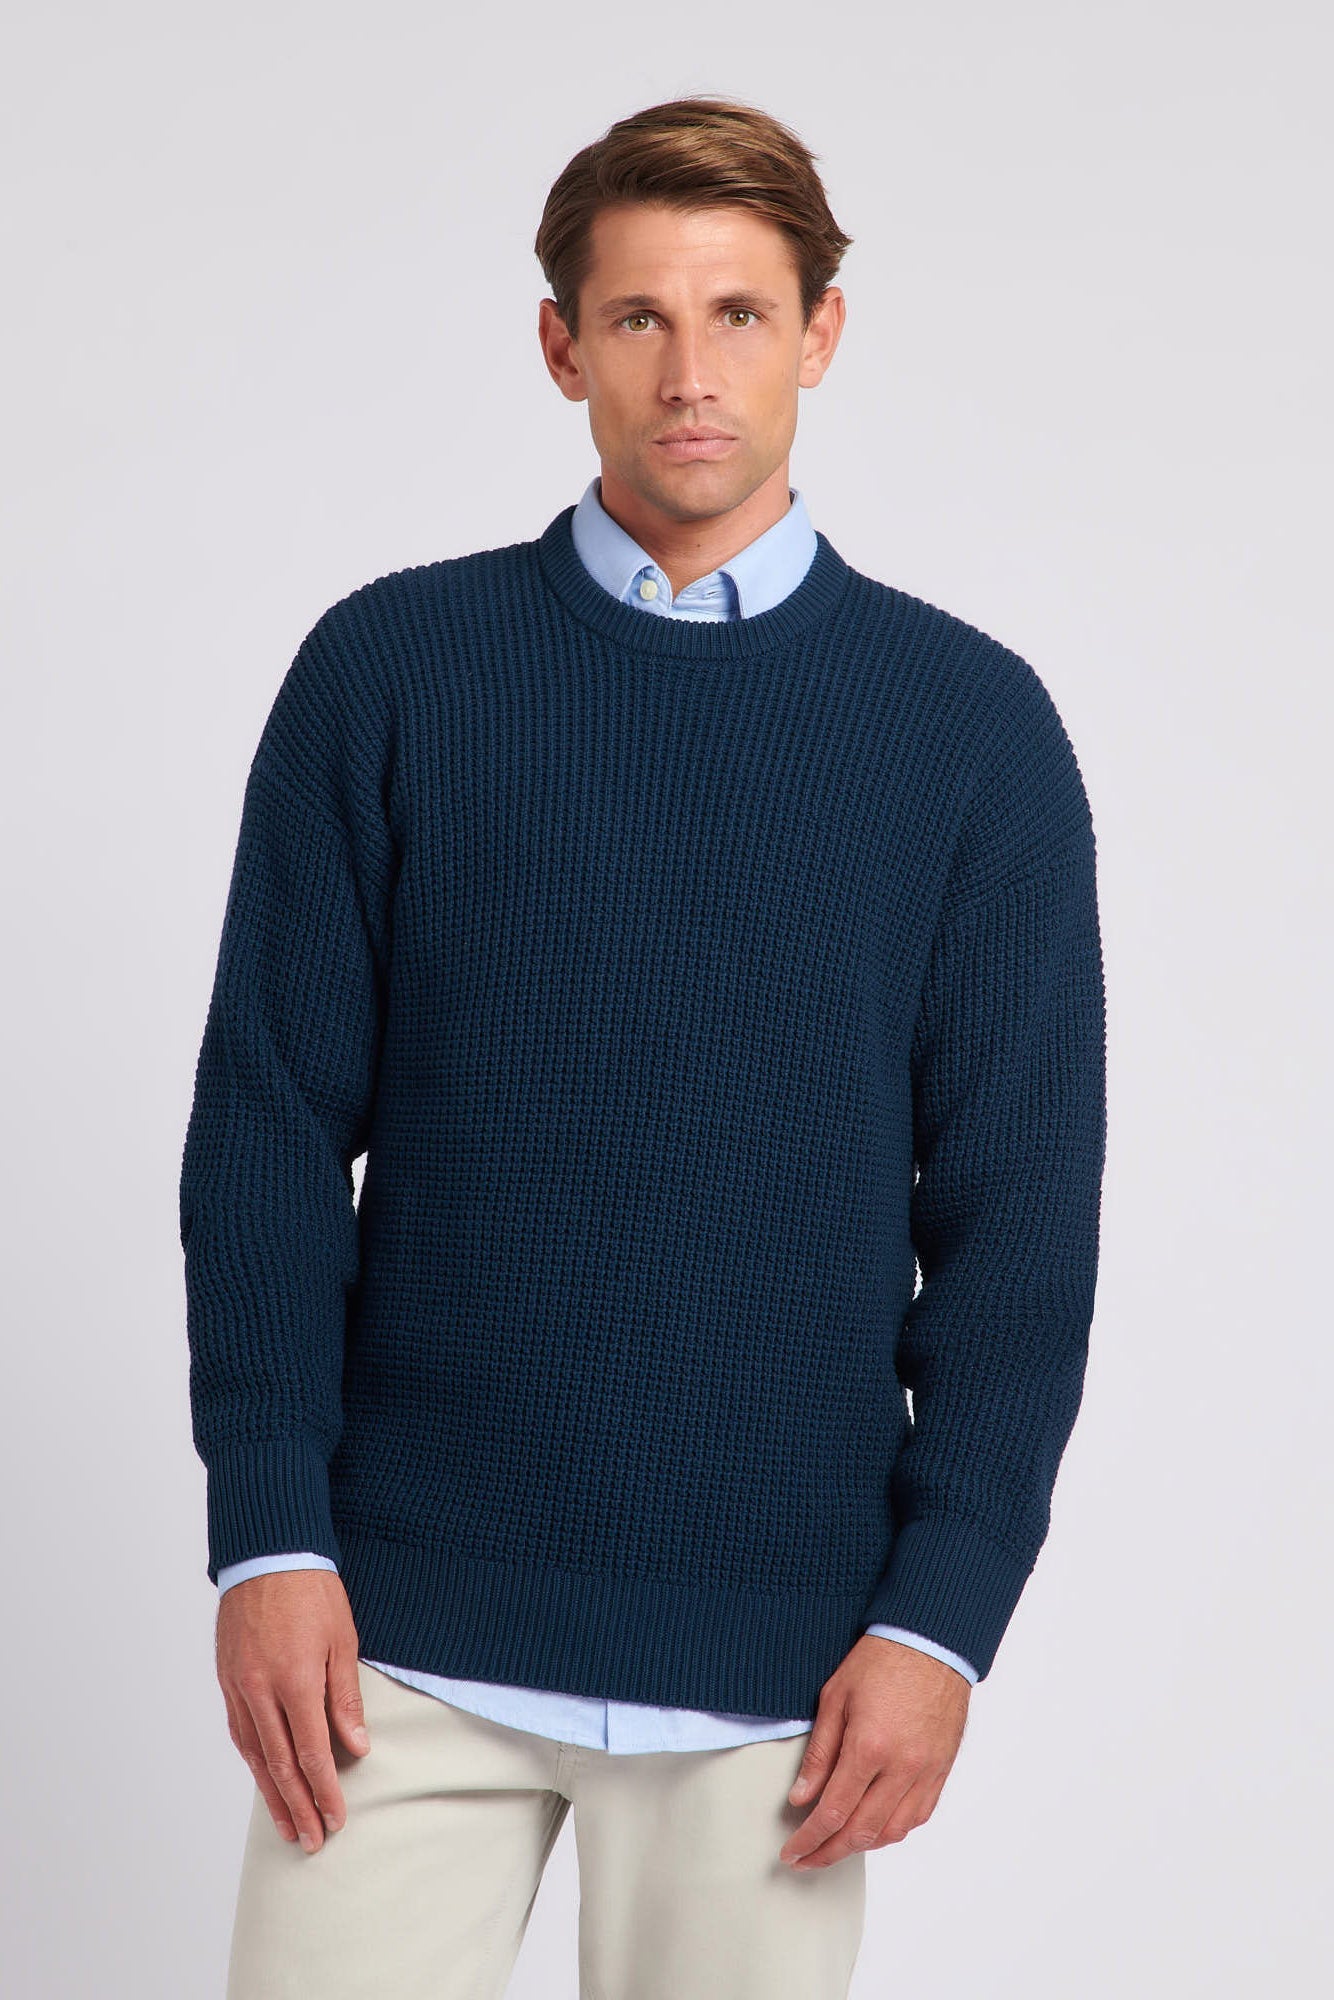 U.S. Polo Assn. Mens Waffle Knit Crew Neck Jumper in Total Eclipse